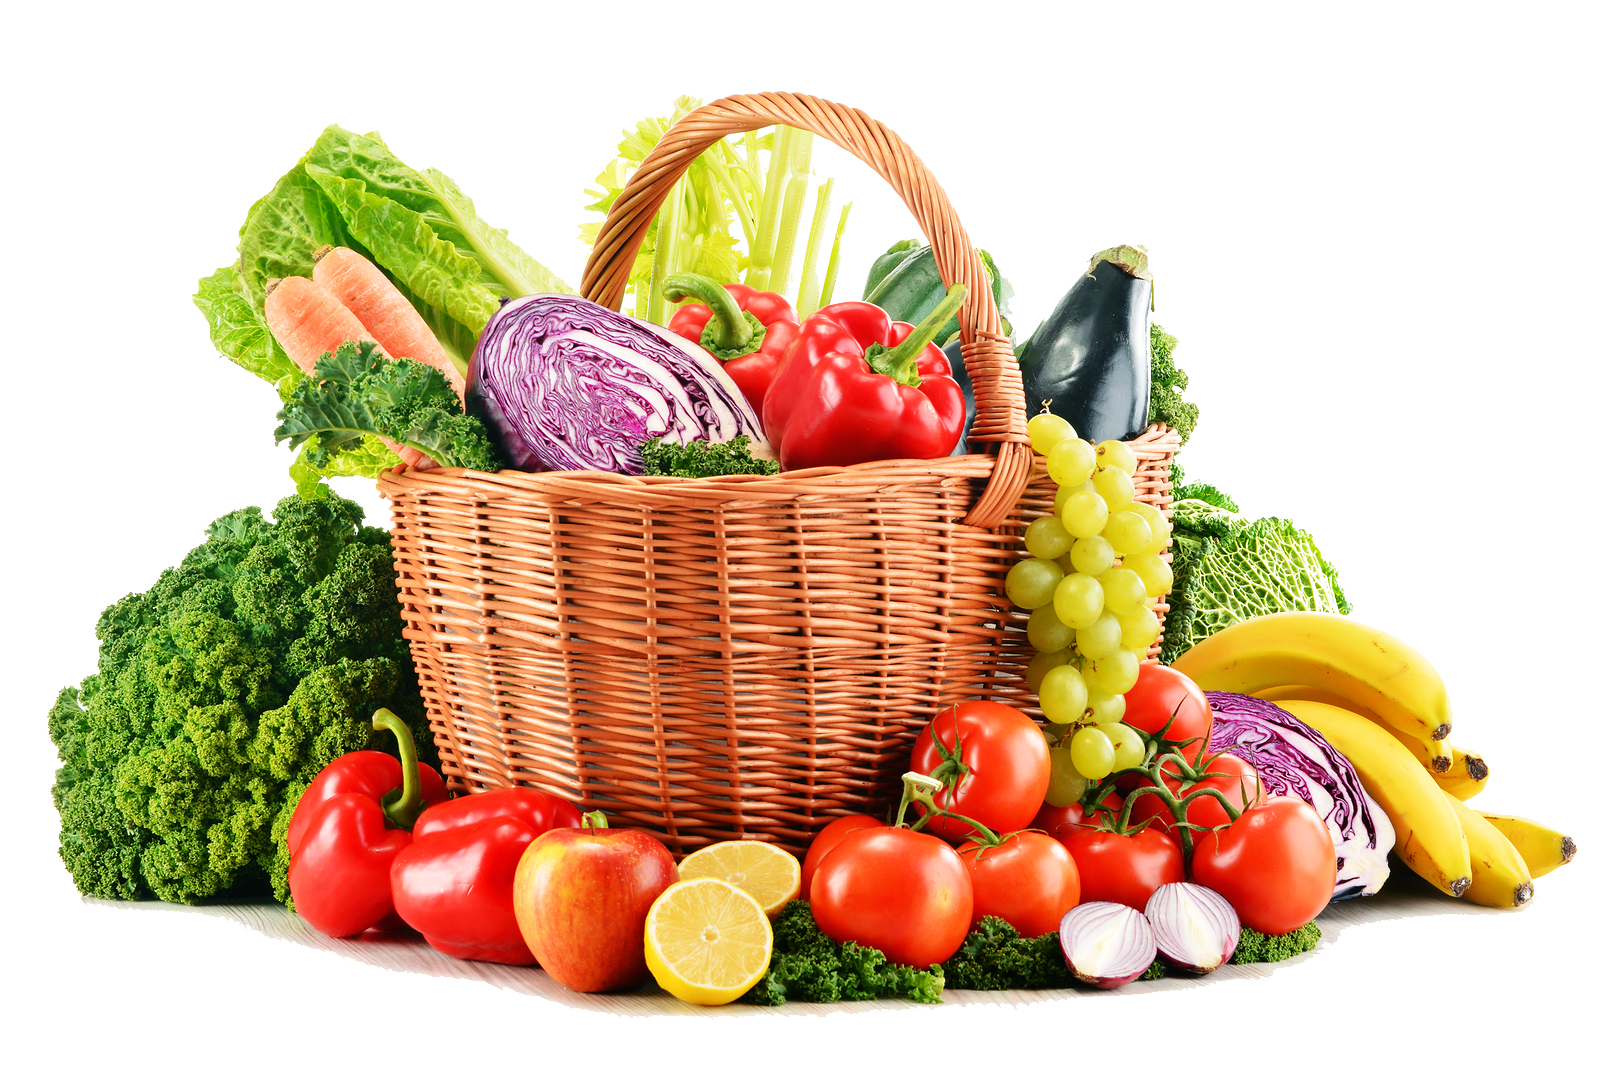 And Fresh Vegetables Fruits Download Free Image PNG Image